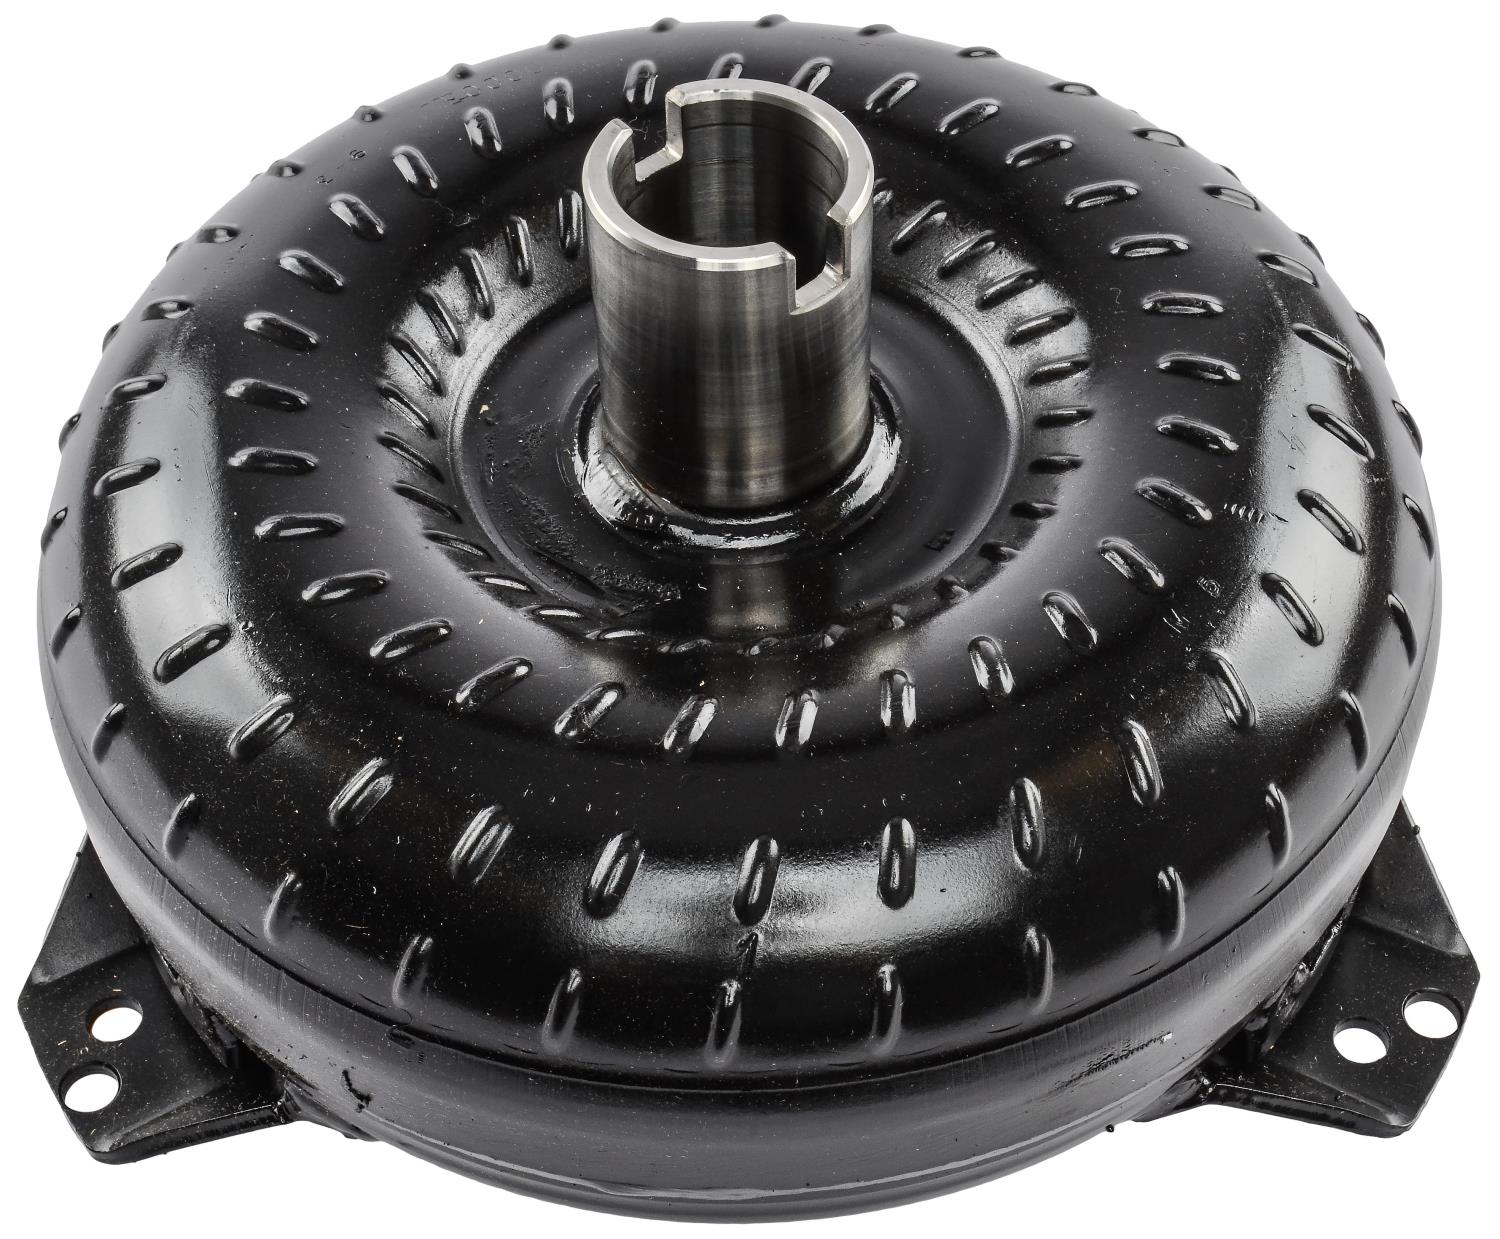 Torque Converter for GM TH350/TH400